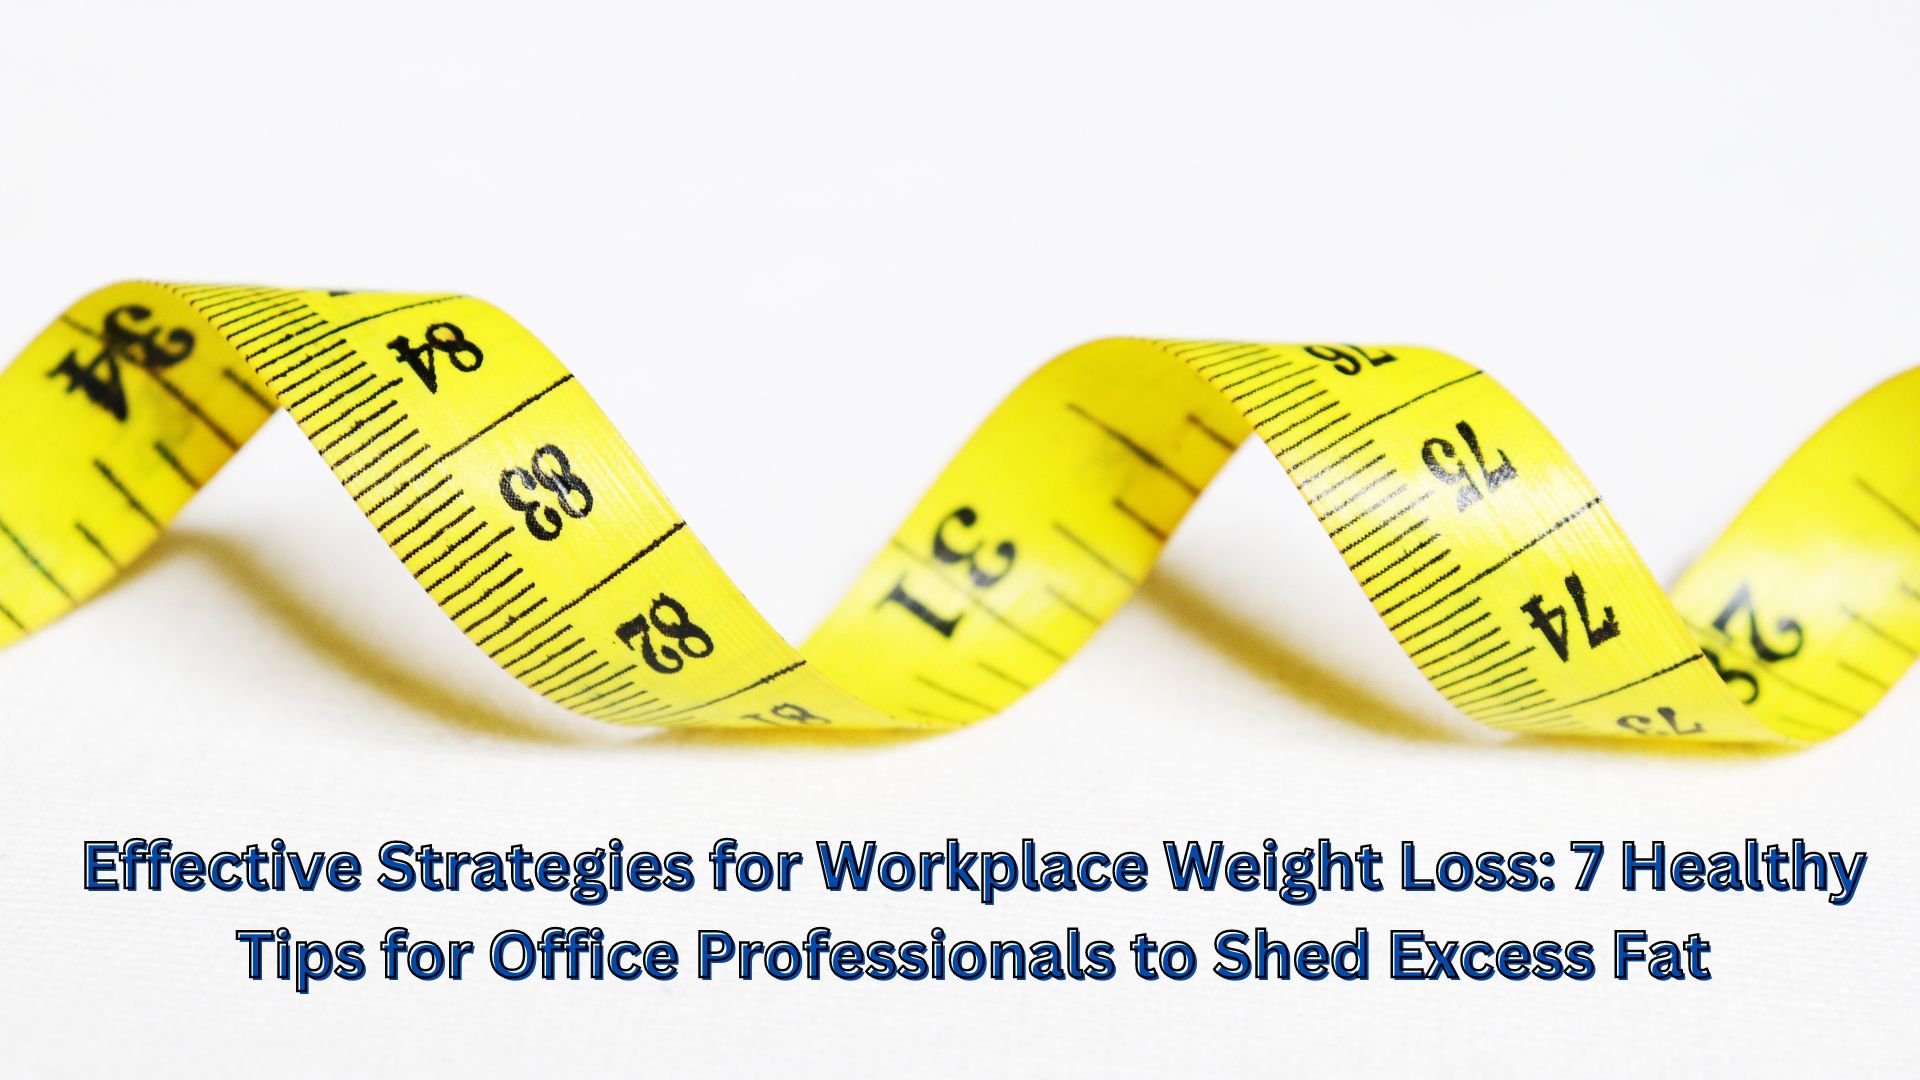 Effective Strategies for Workplace Weight Loss: 7 Healthy Tips for Office Professionals to Shed Excess Fat